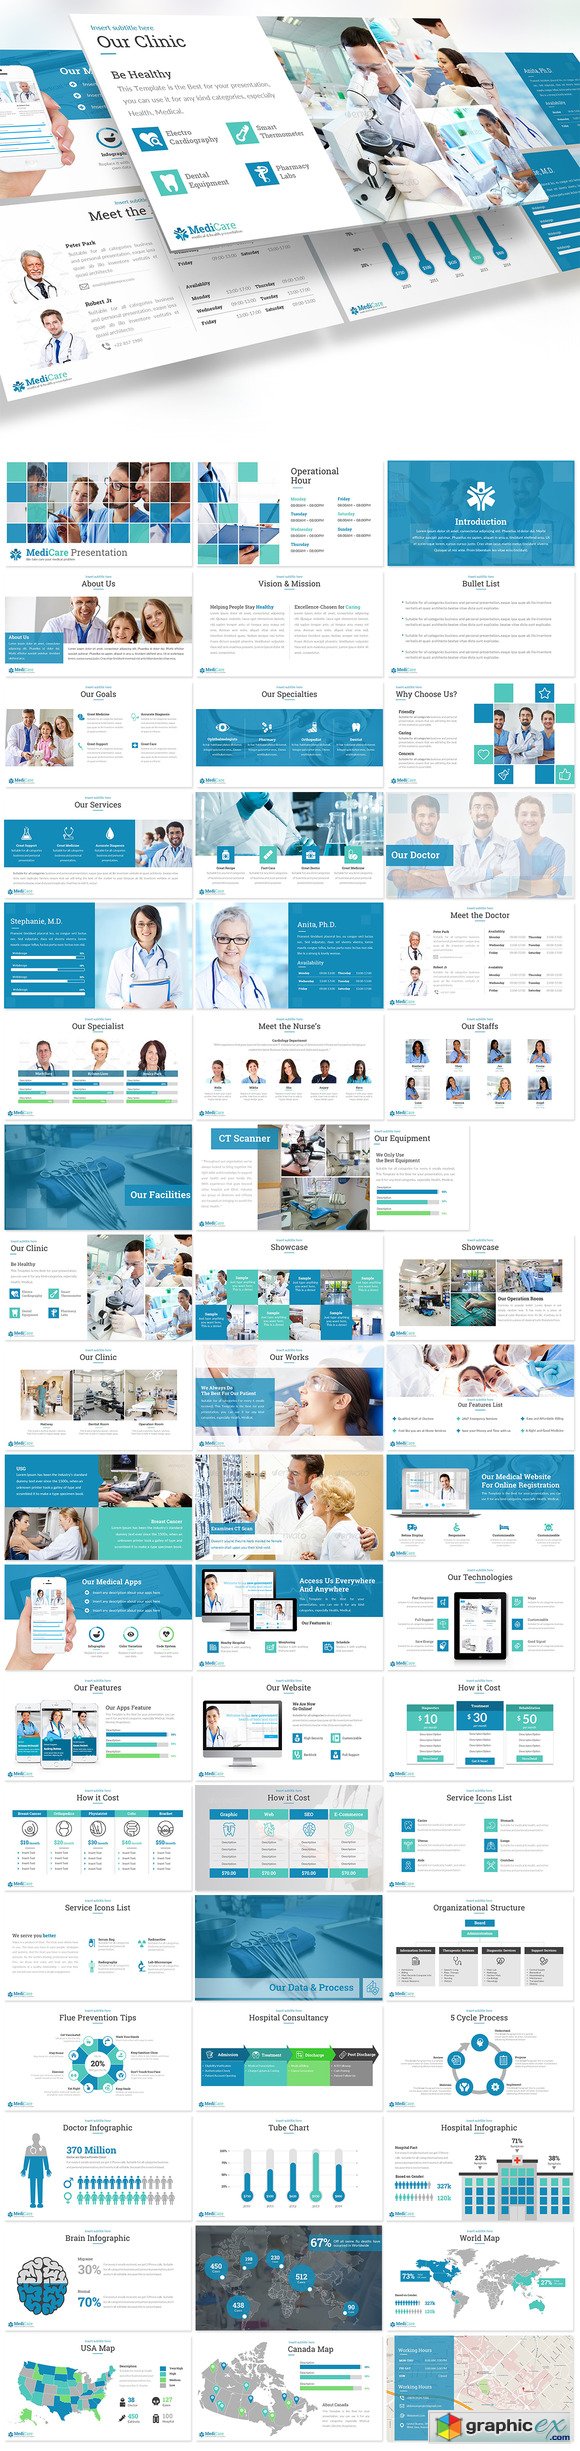 Medicare - Powerpoint Template